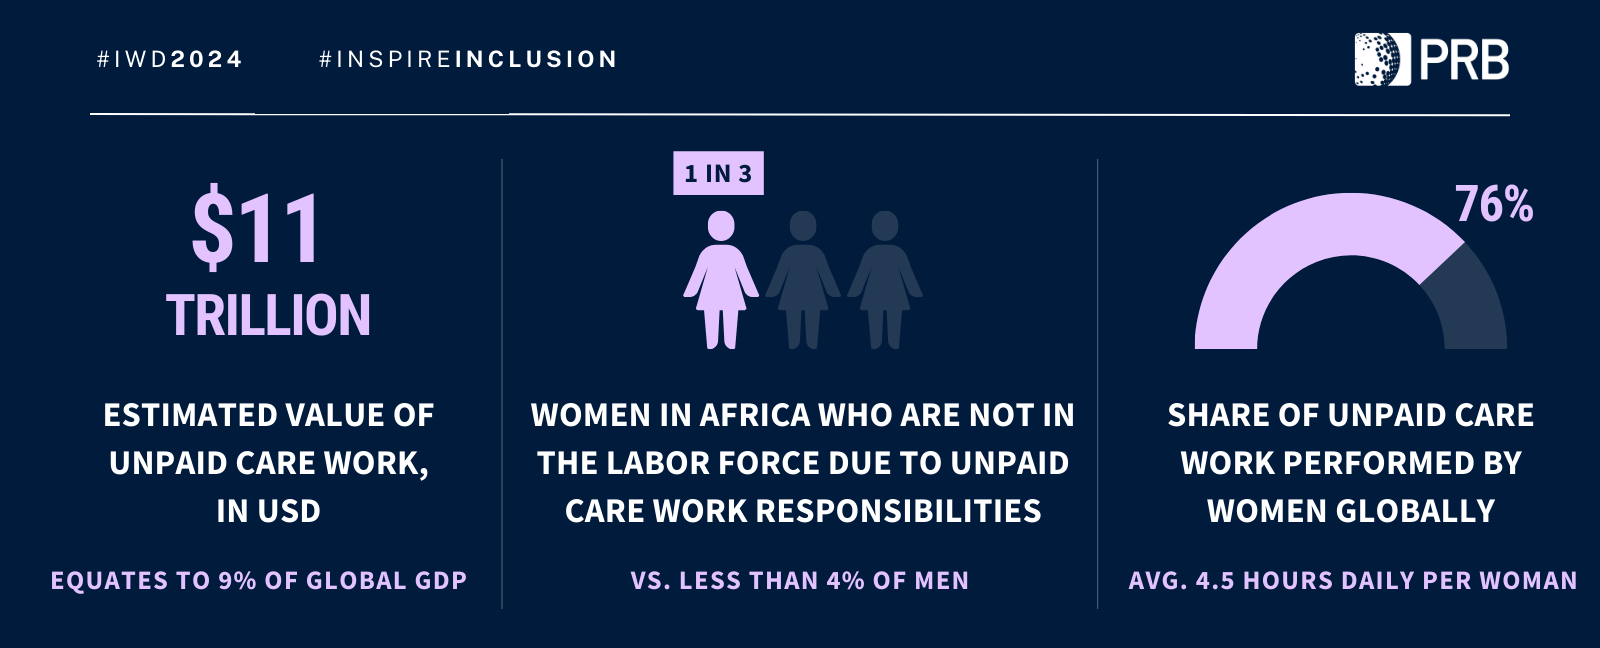 Infographic highlighting different stats around women's care work.